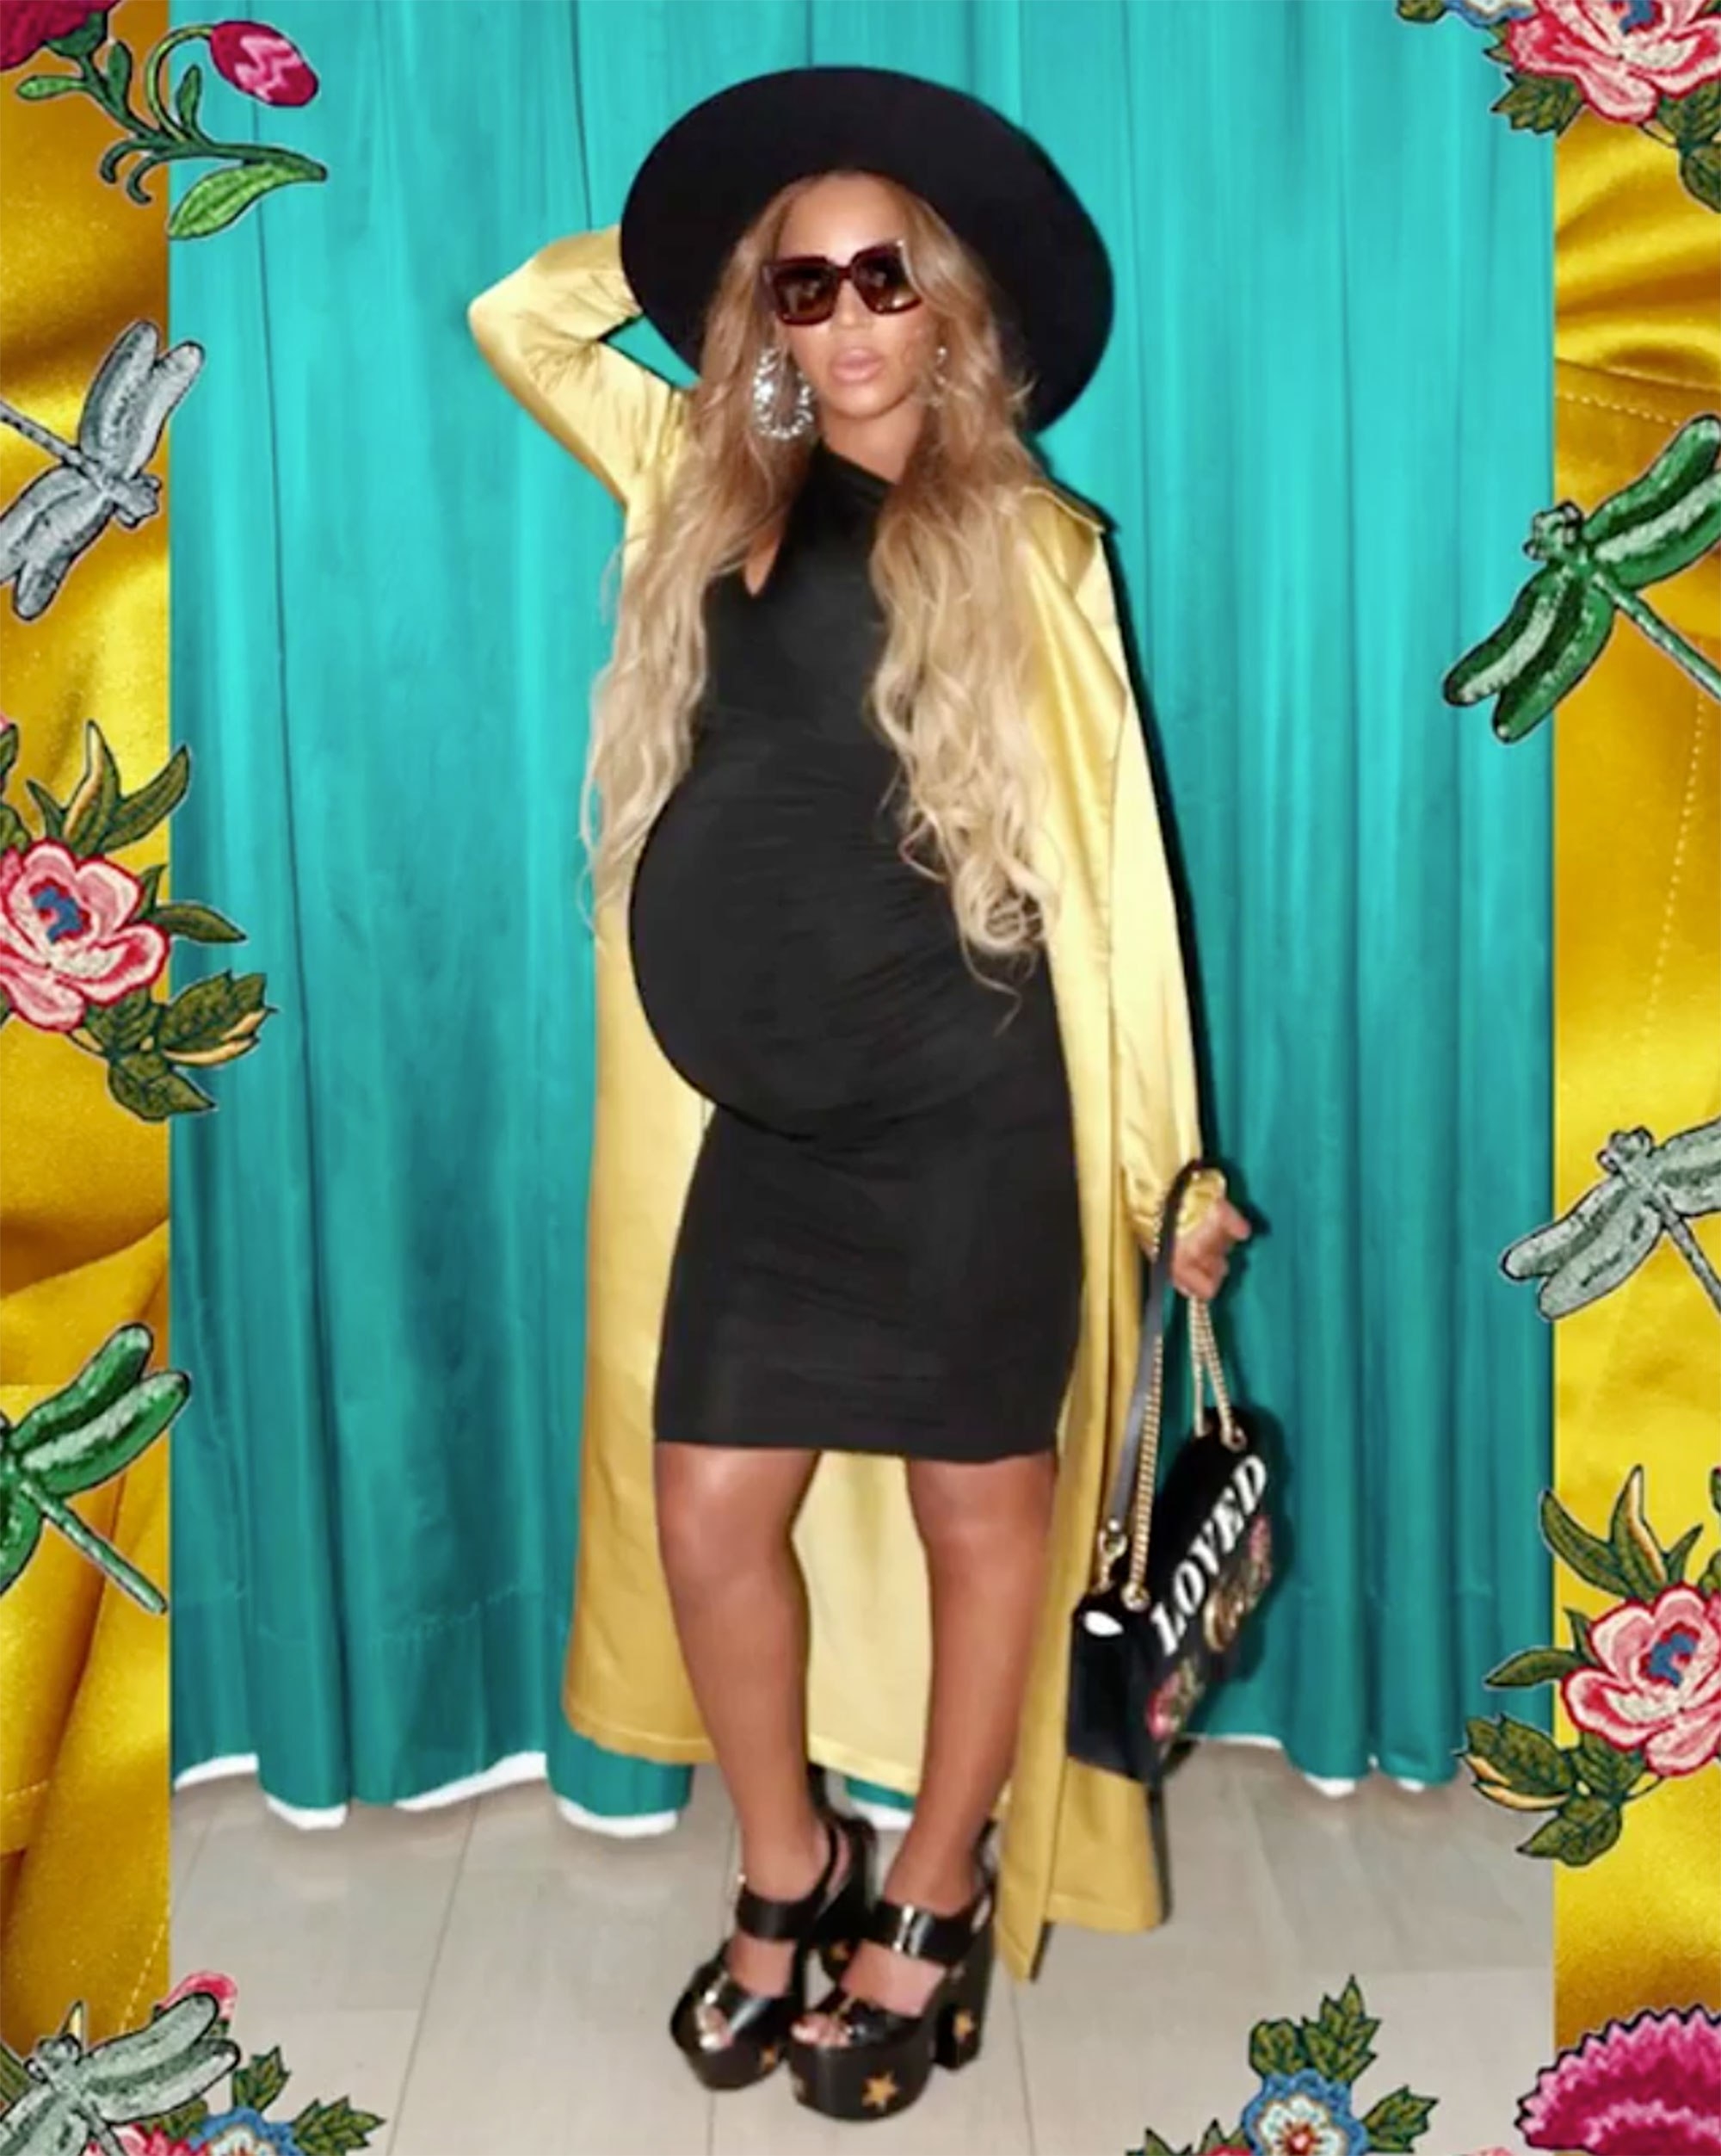 Have Beyoncé’s twins arrived yet? The Internet’s best theories